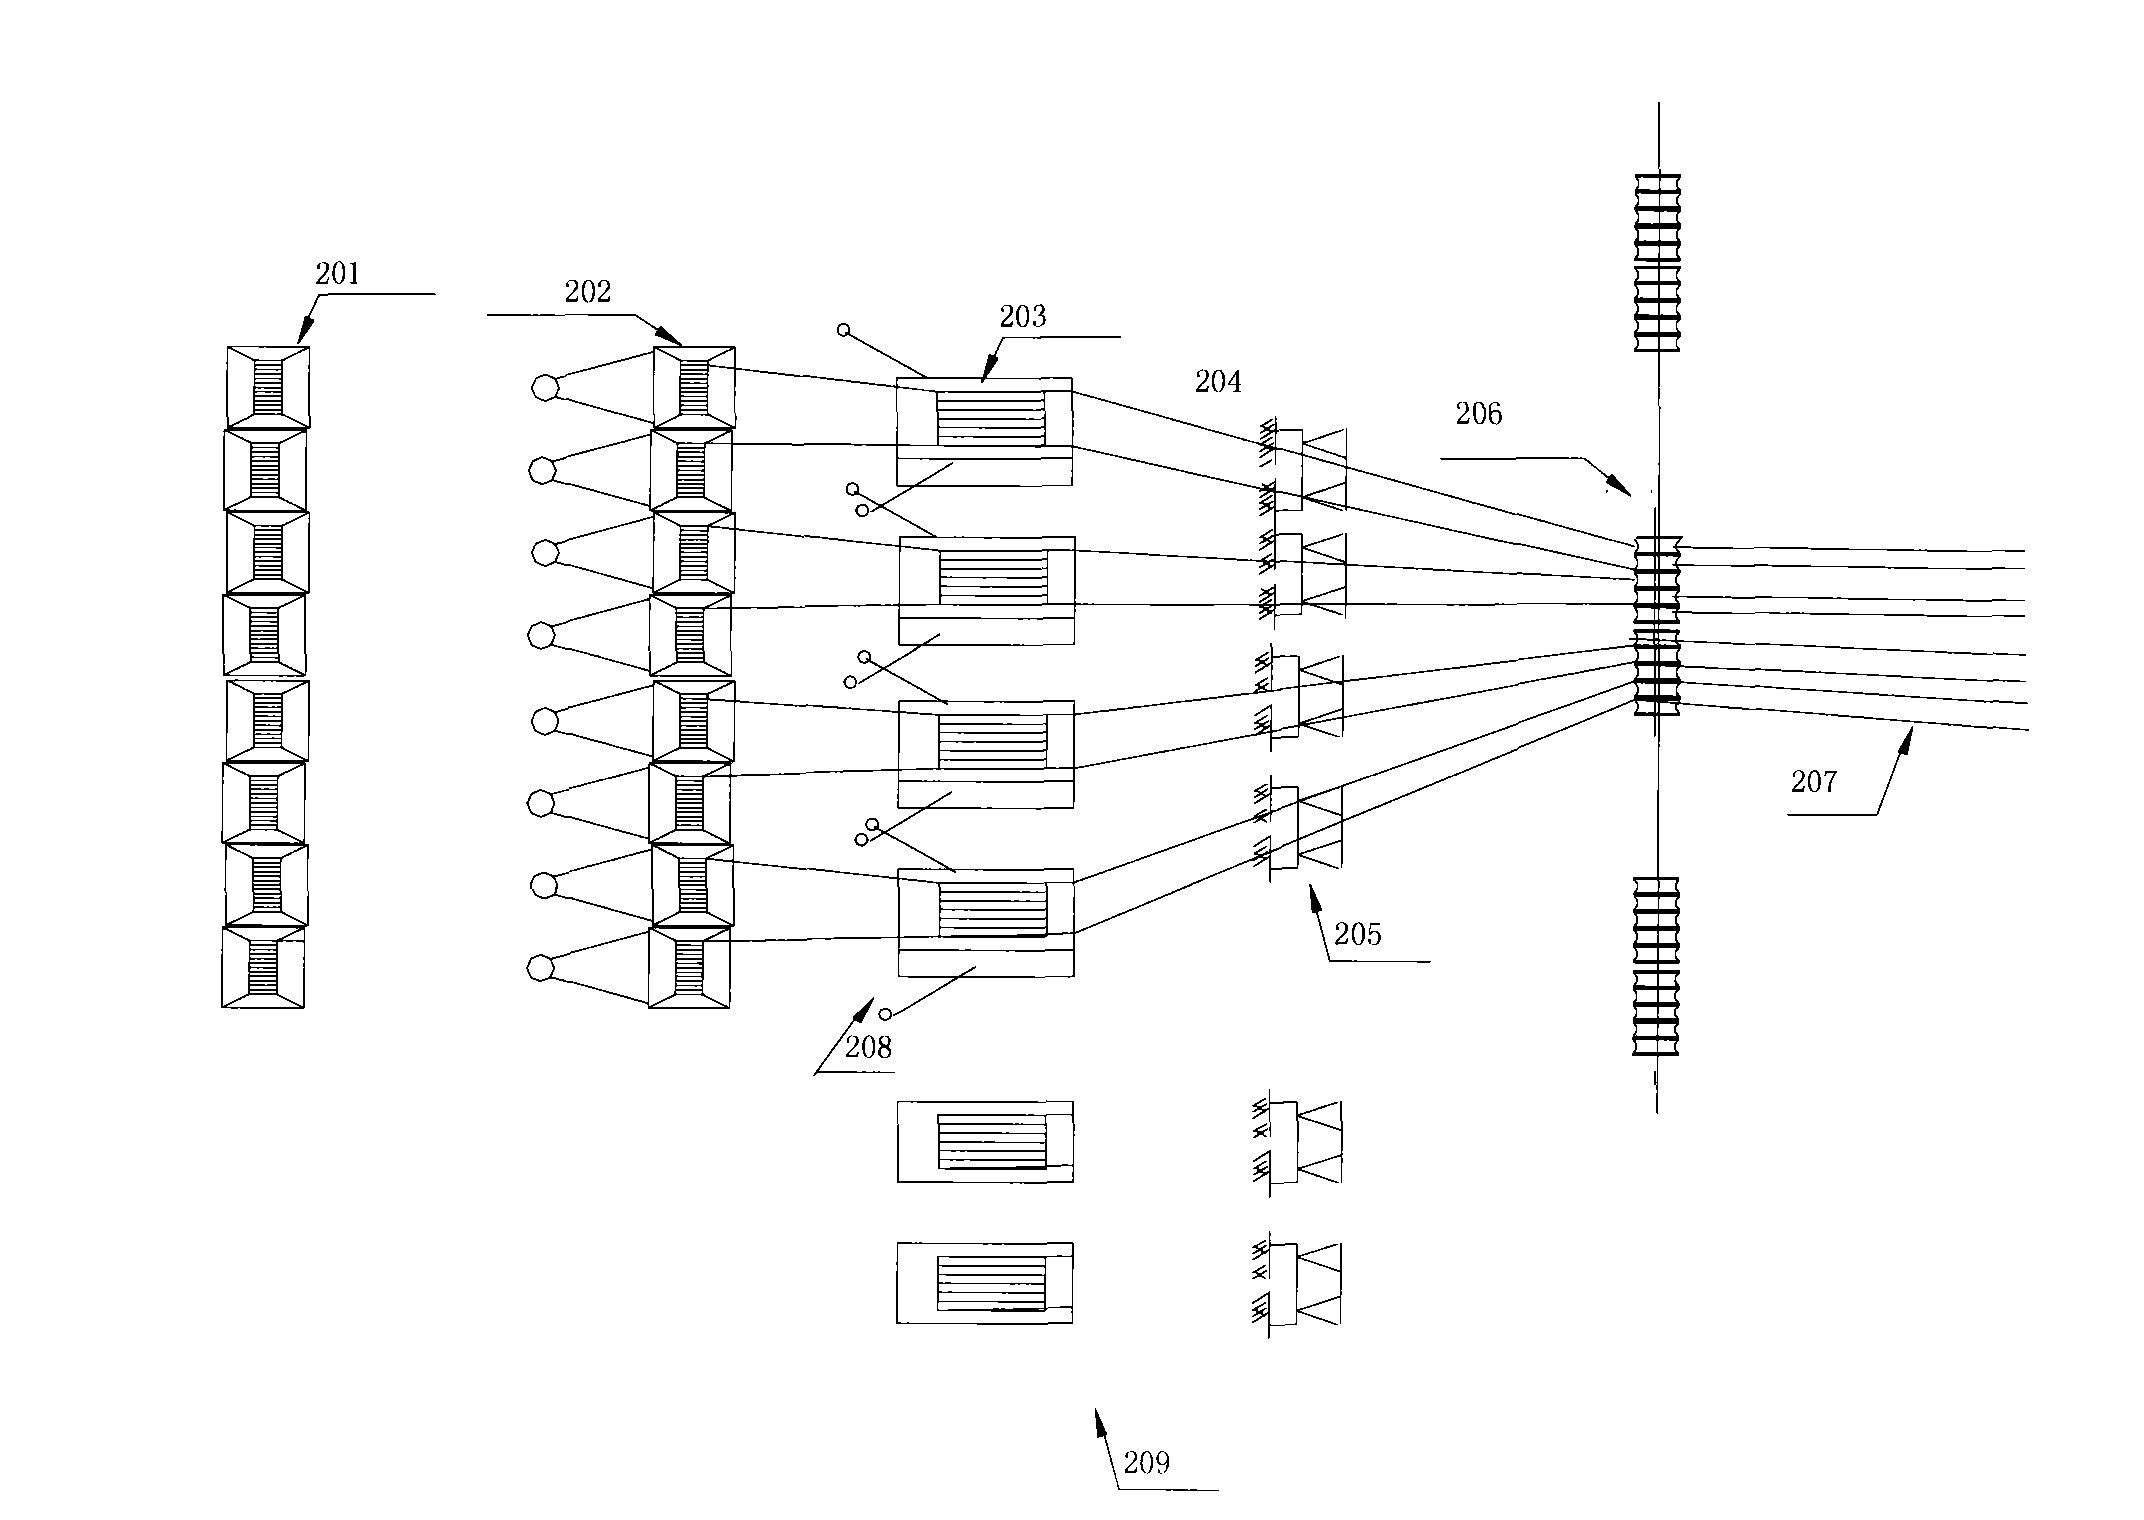 Method of extra-high voltage tension stringing